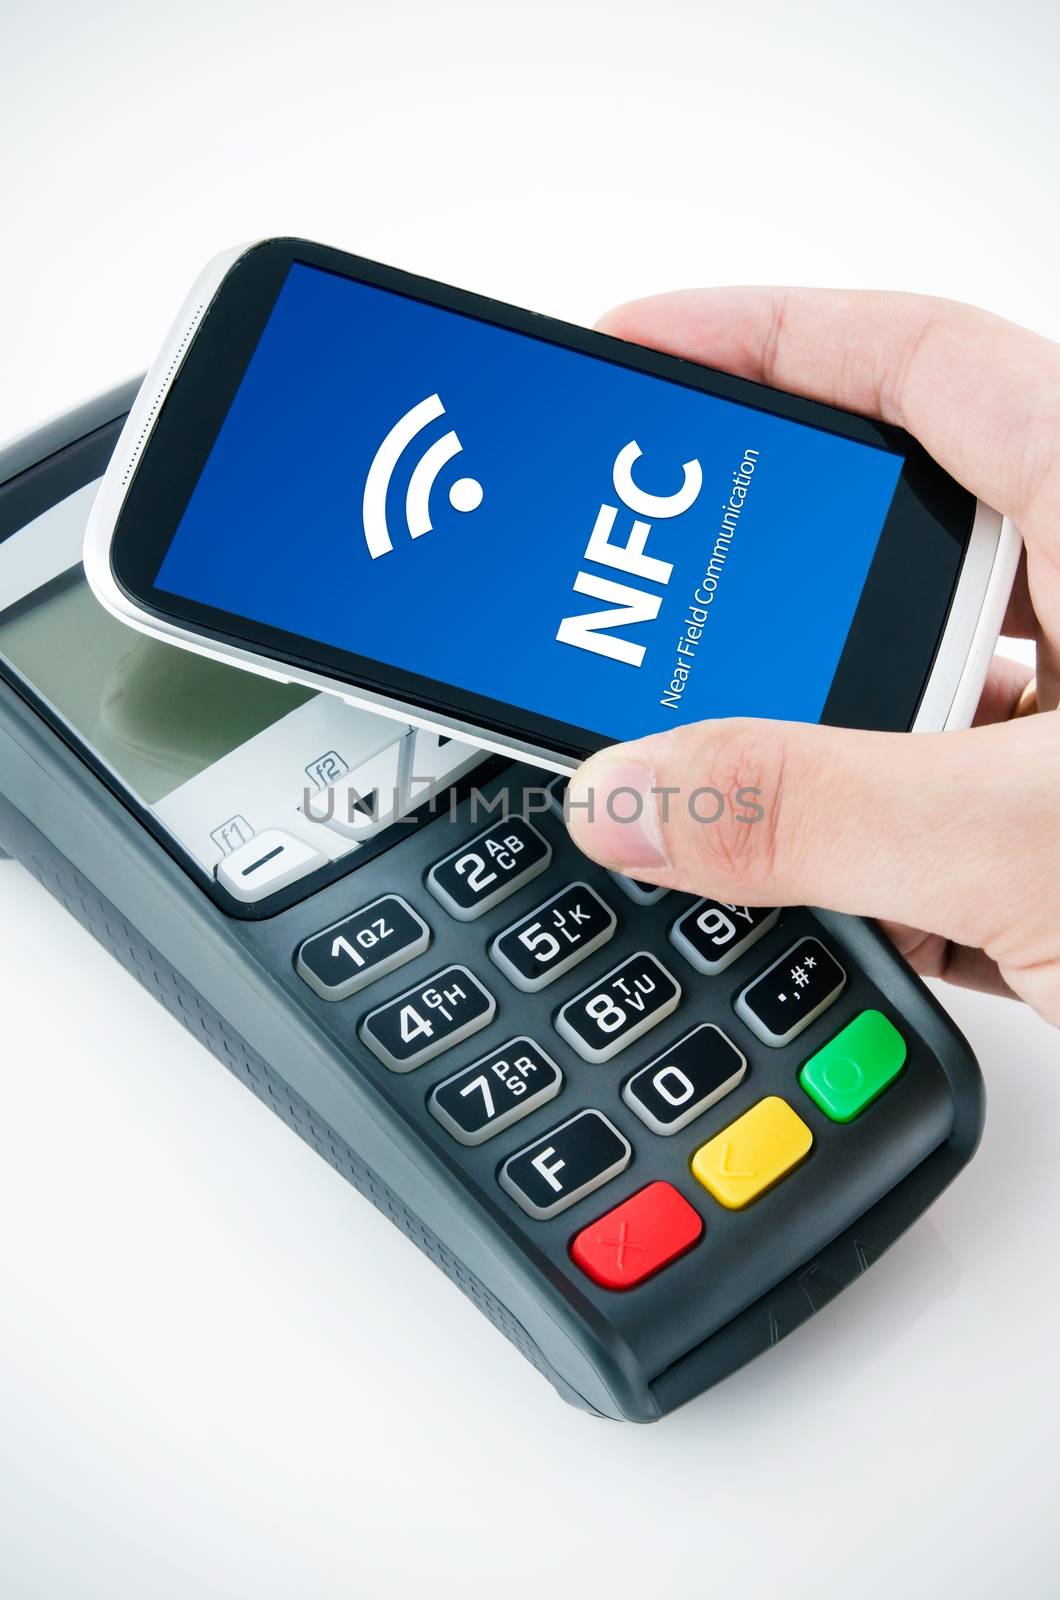 Contactless payment card with NFC chip in smart phone